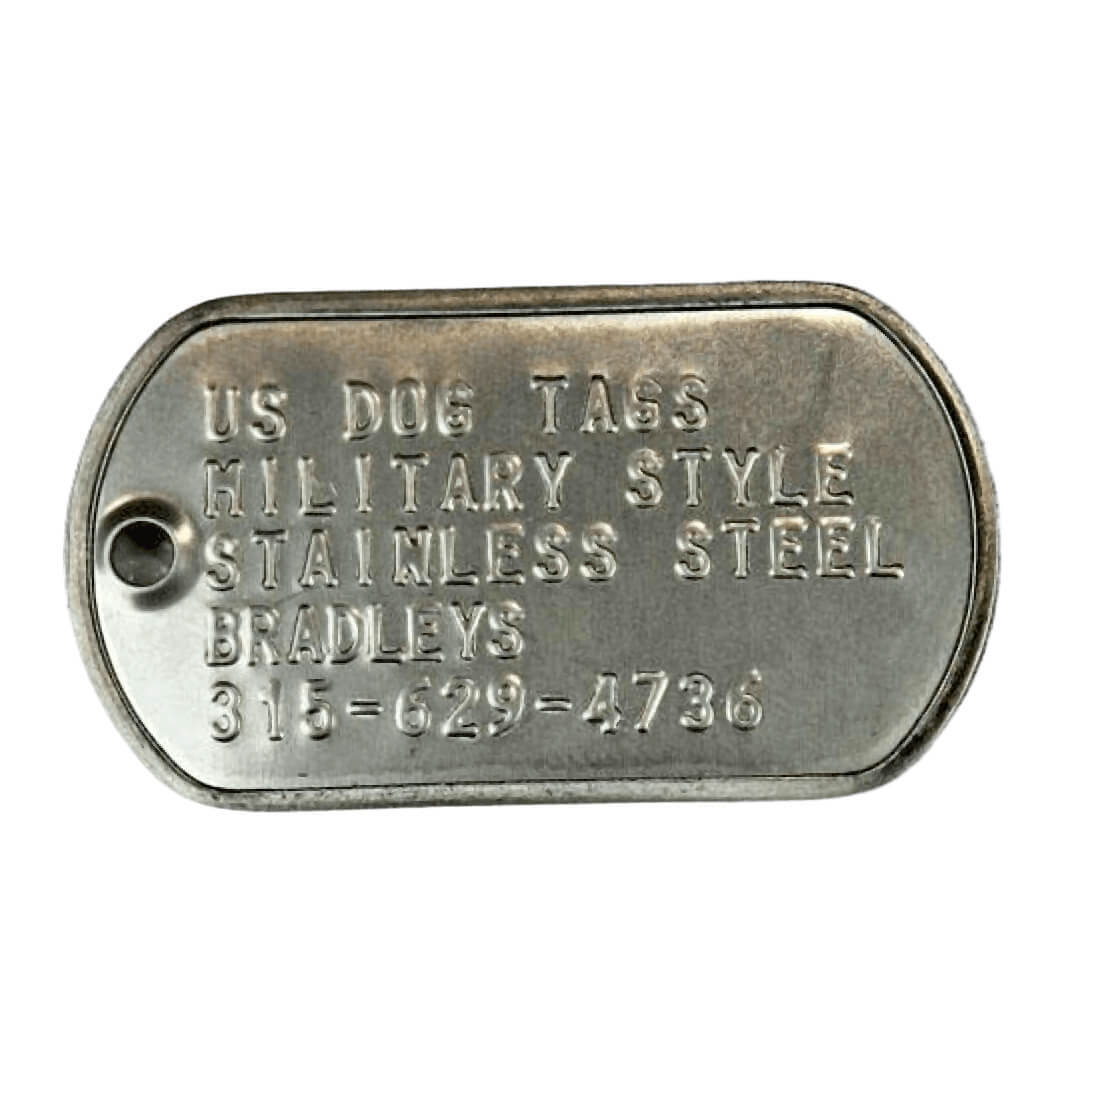 GI Stainless Steel Dog Tags